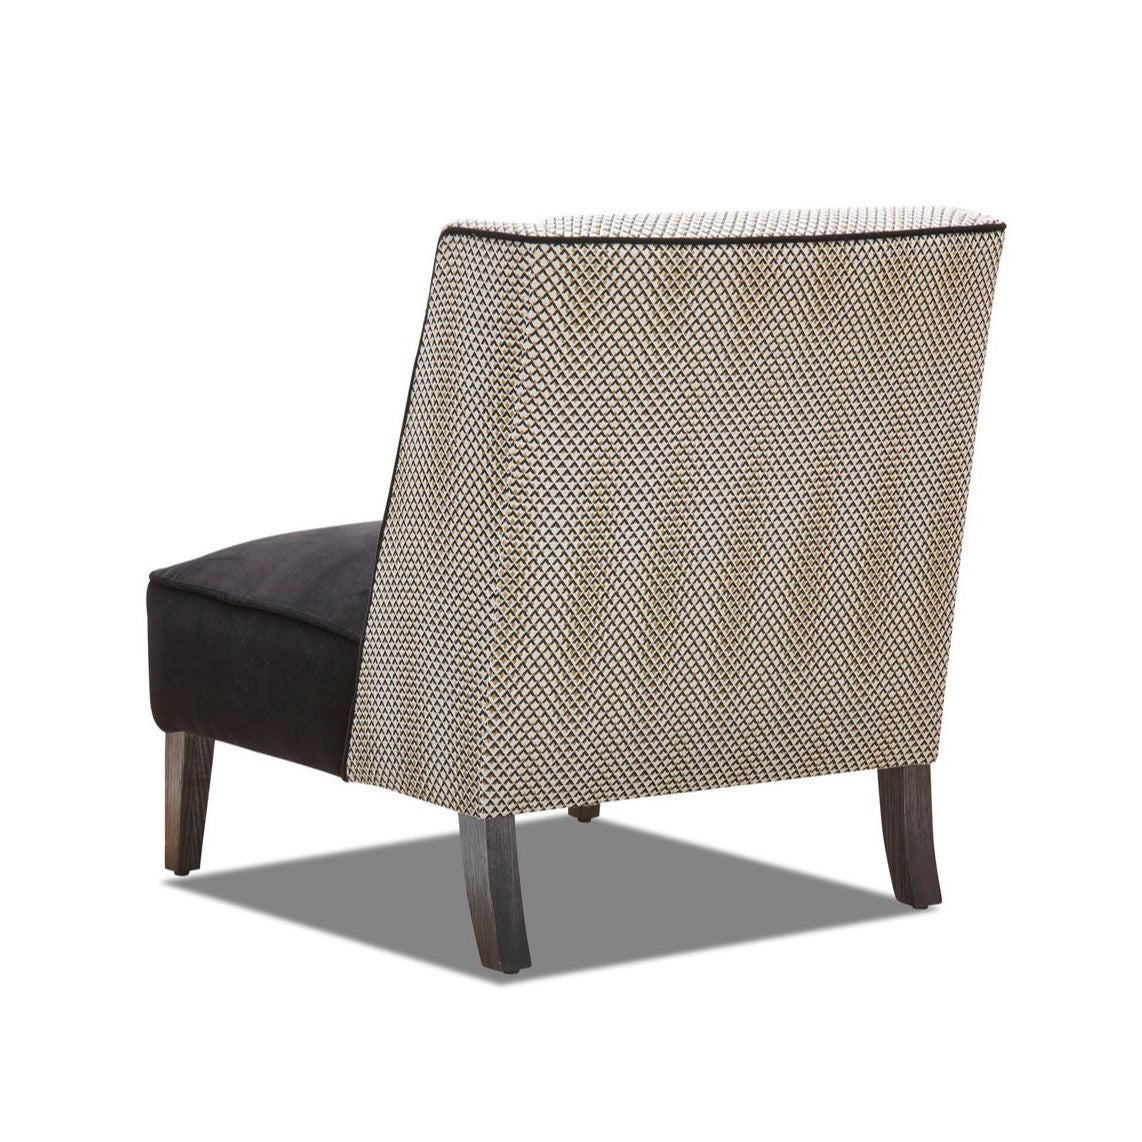 Charles Occasional Chair by Molmic available from Make Your House A Home, Furniture Store located in Bendigo, Victoria. Australian Made in Melbourne.